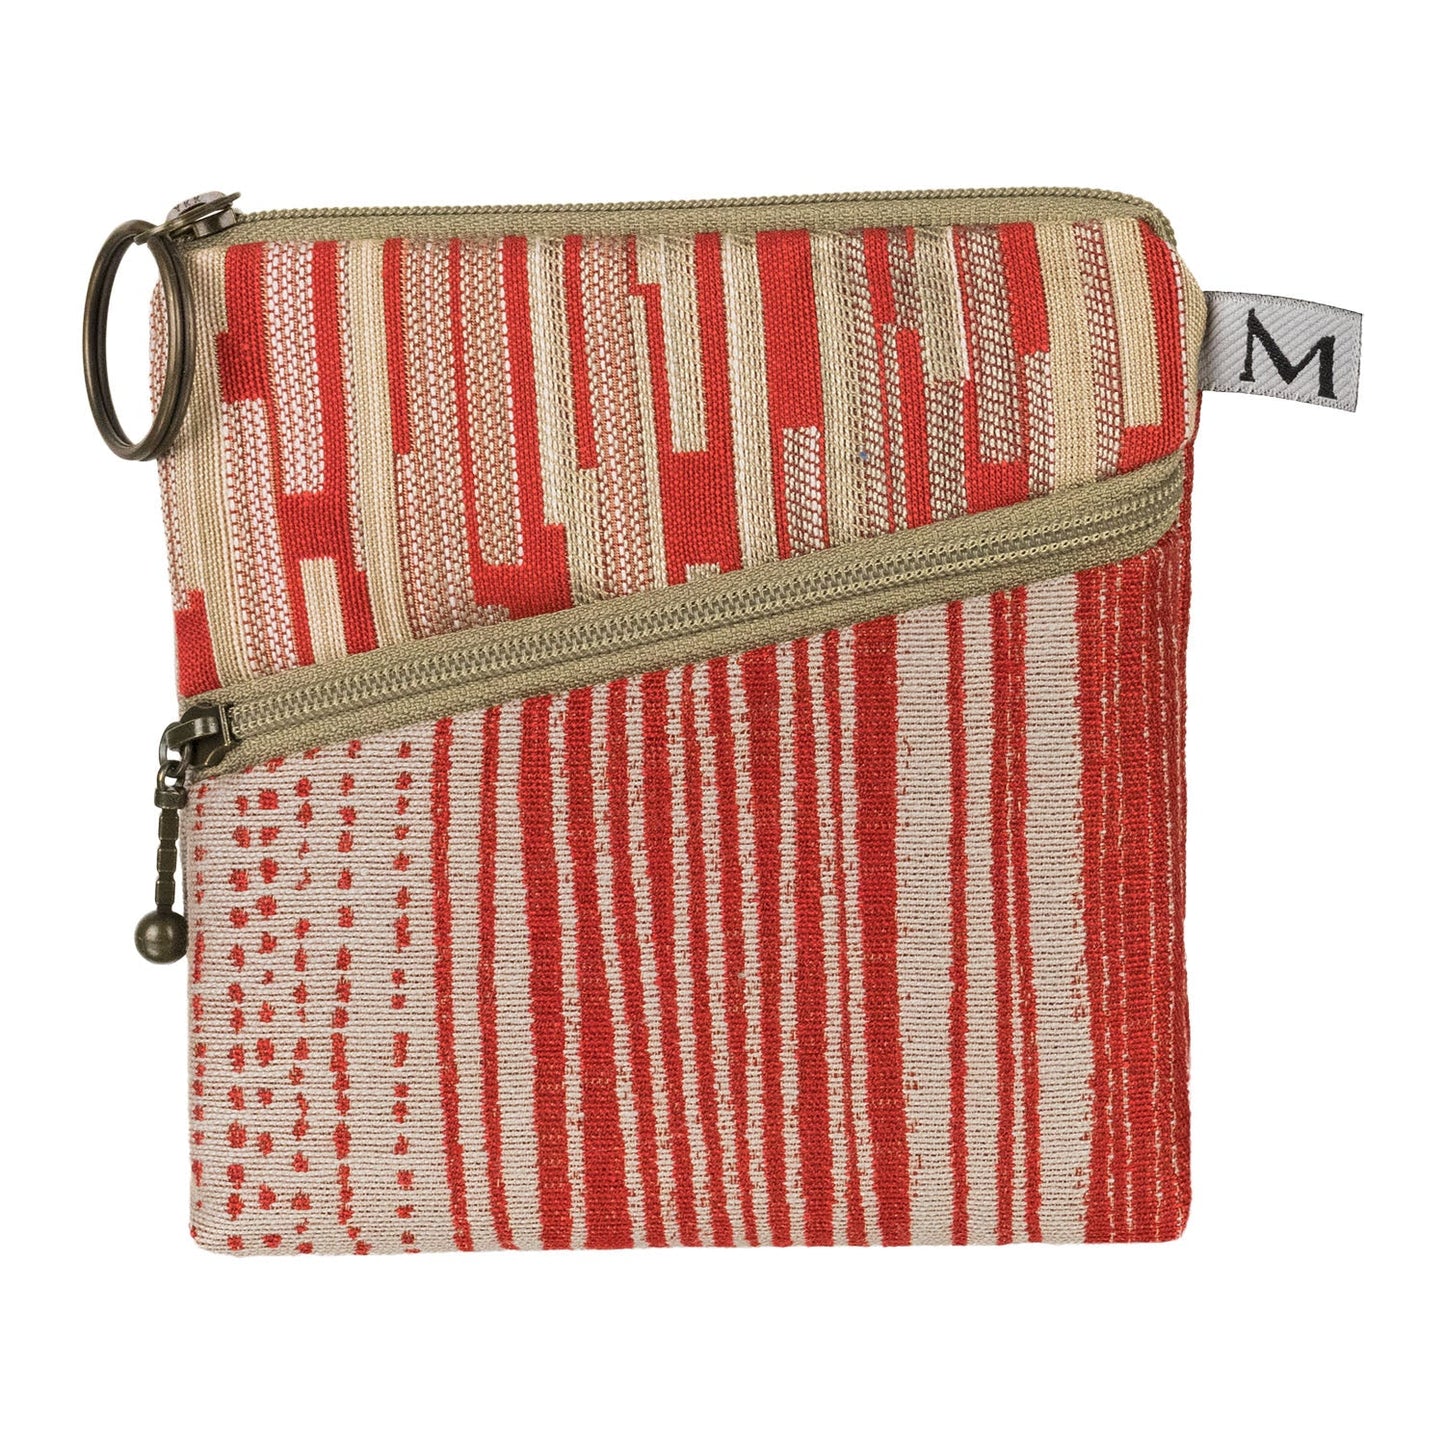 Roo Pouch, Mod Stripe Red